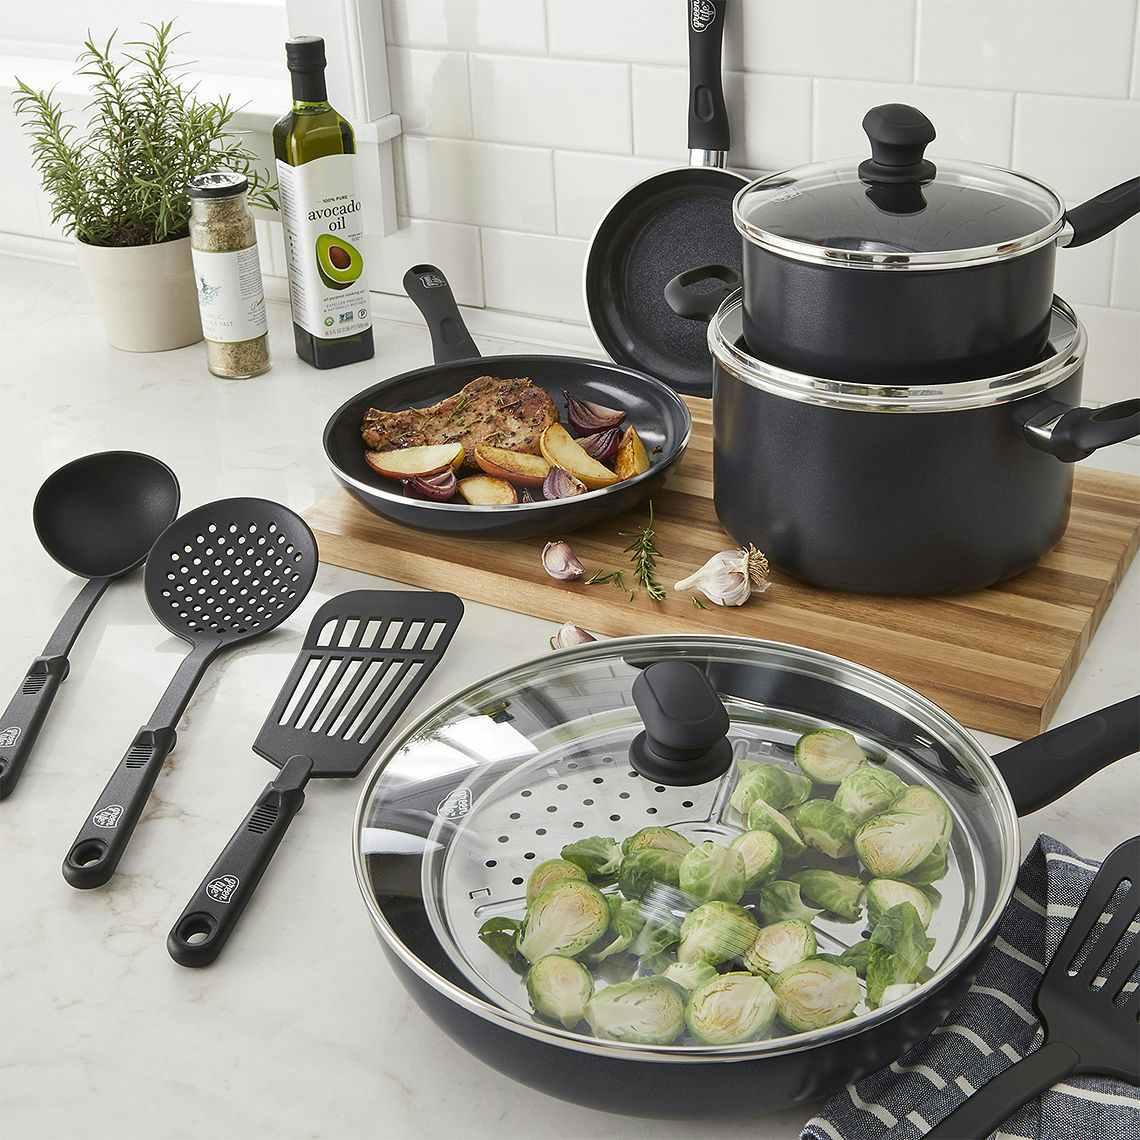 jcpenney-greenlife-non-stick-cookware-set-021921